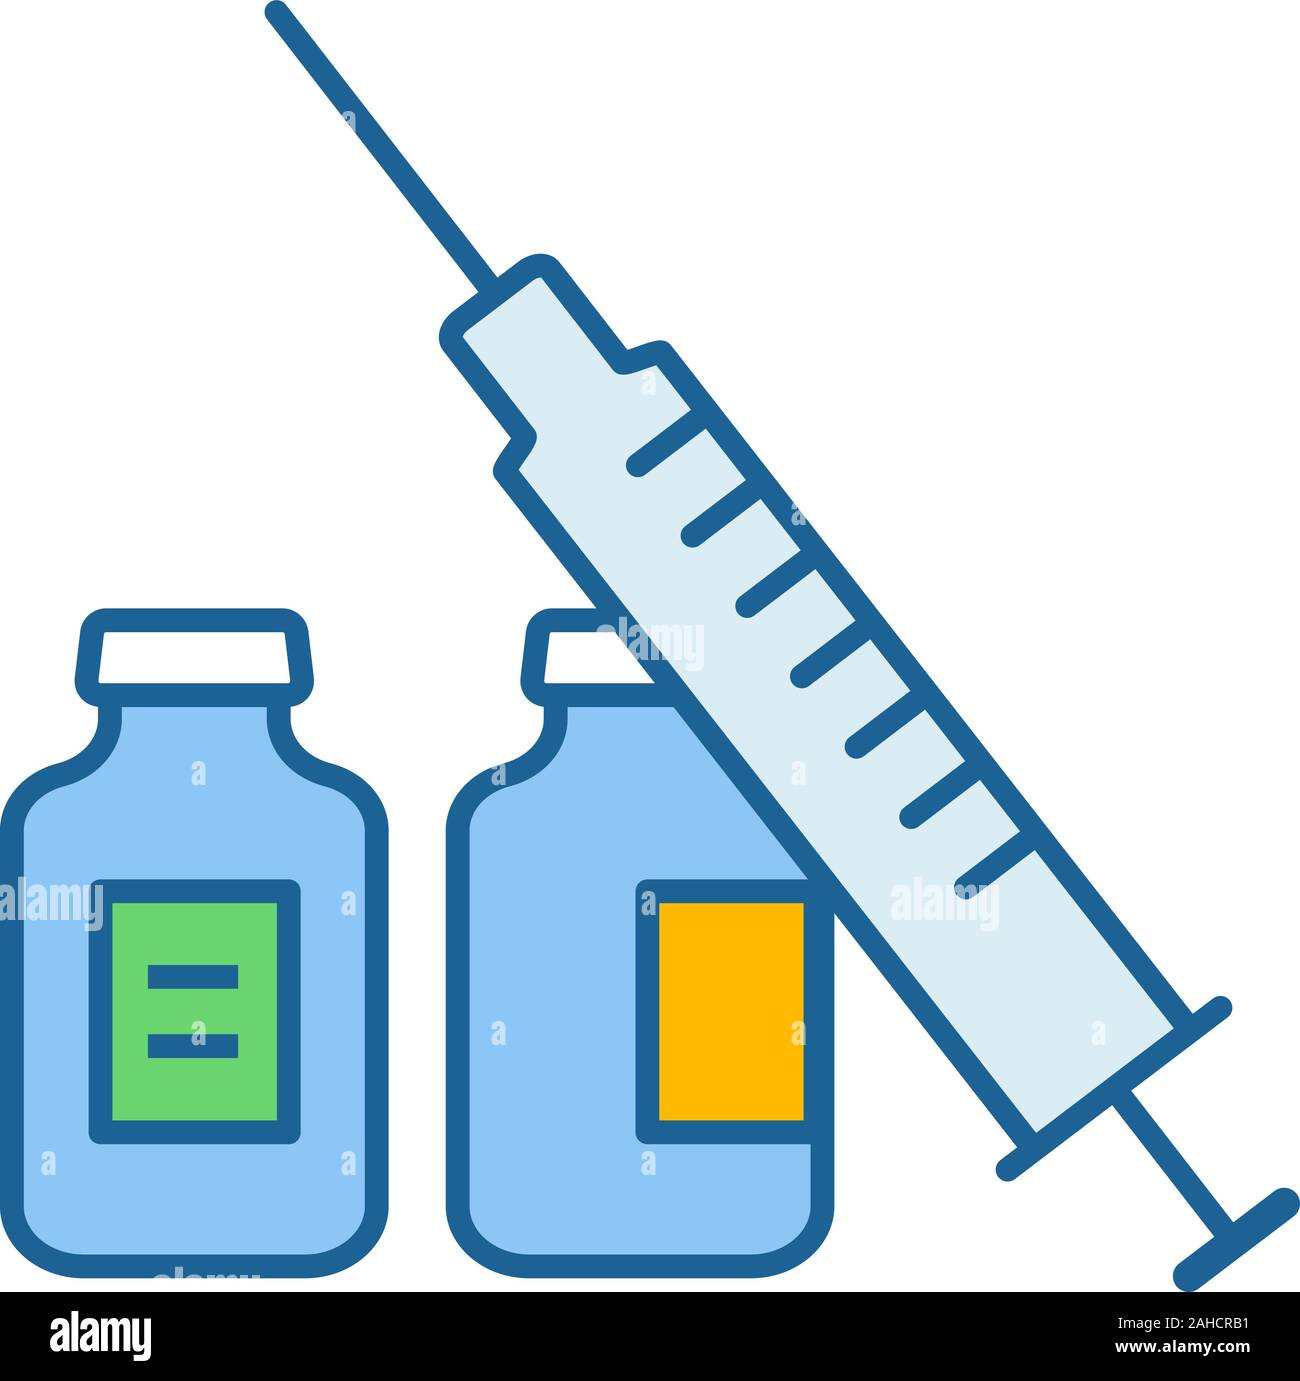 Syringe and vials color icon. Flu shot. Vaccination. Virus, infection prevention. Vaccine. Medications, drugs. Isolated vector illustration Stock Vector